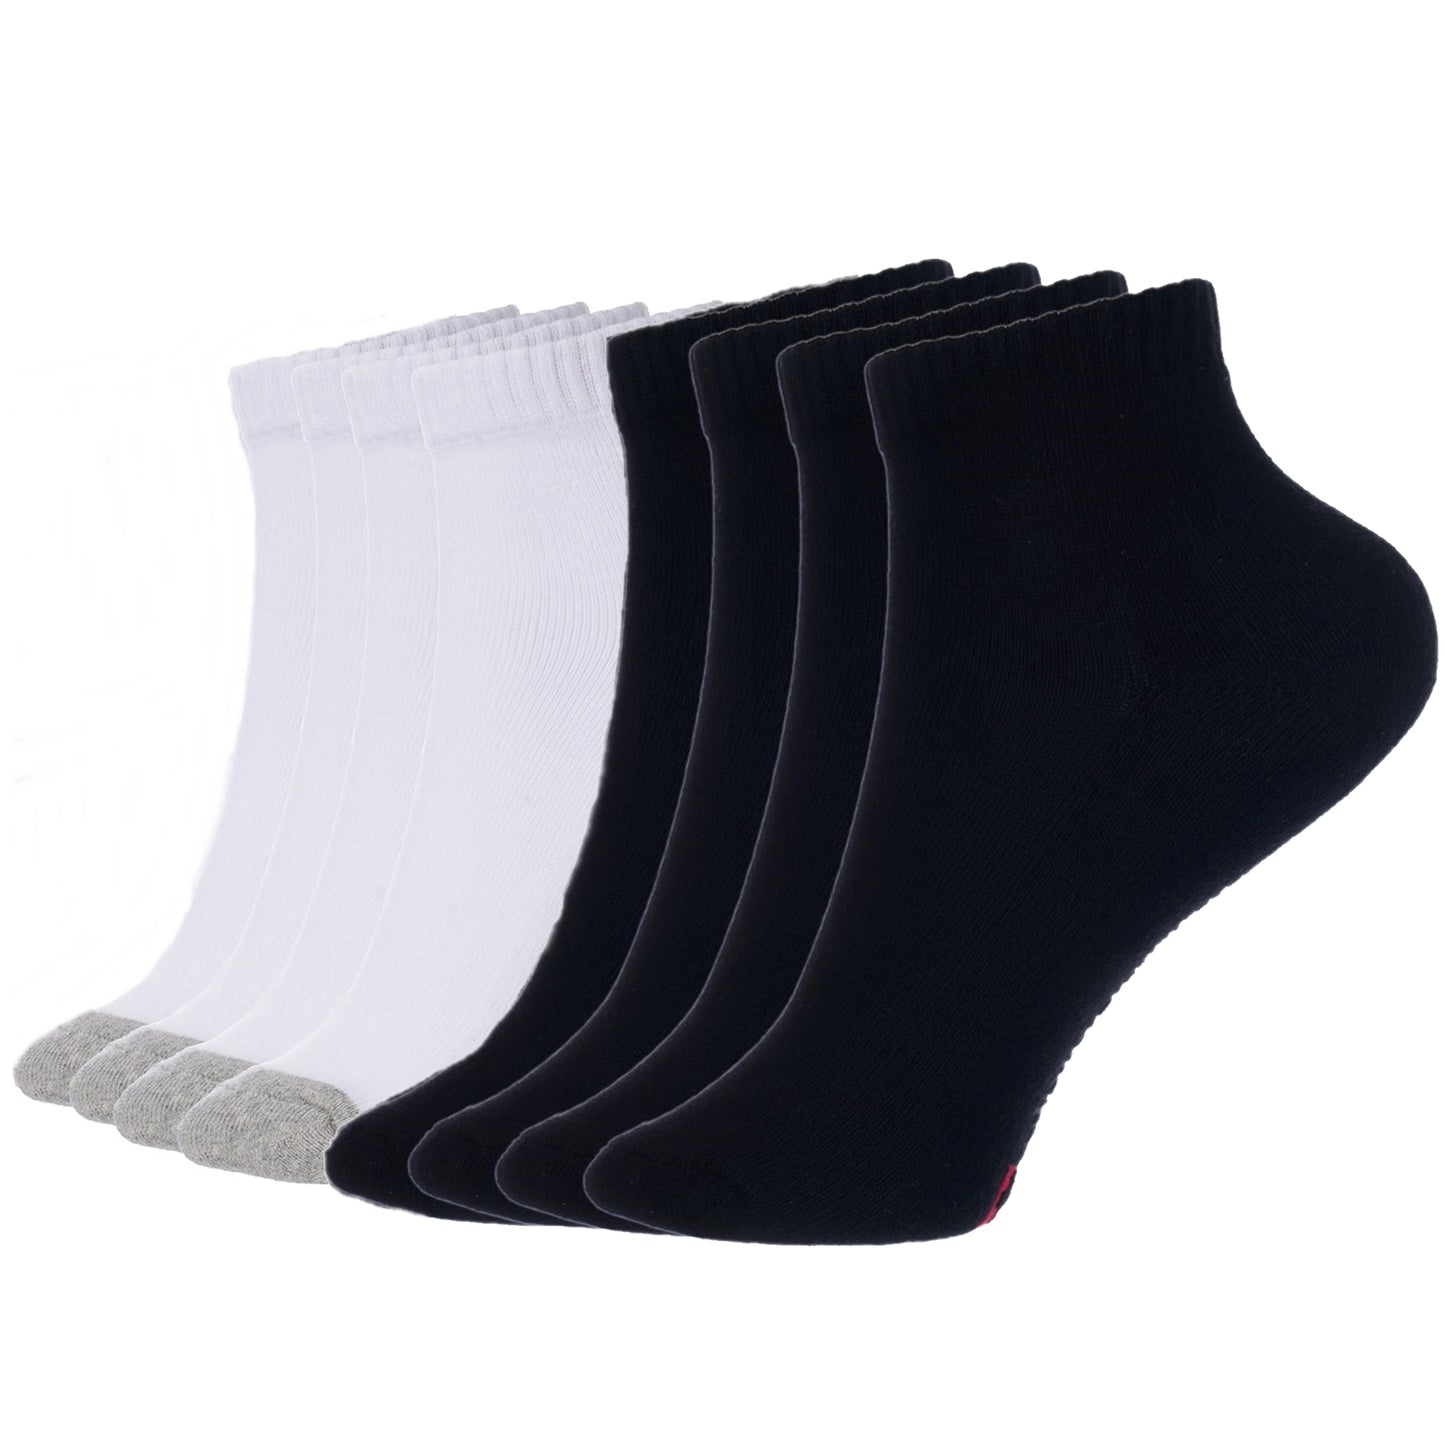 8 Pack Low Cut Ankle Athletic Socks